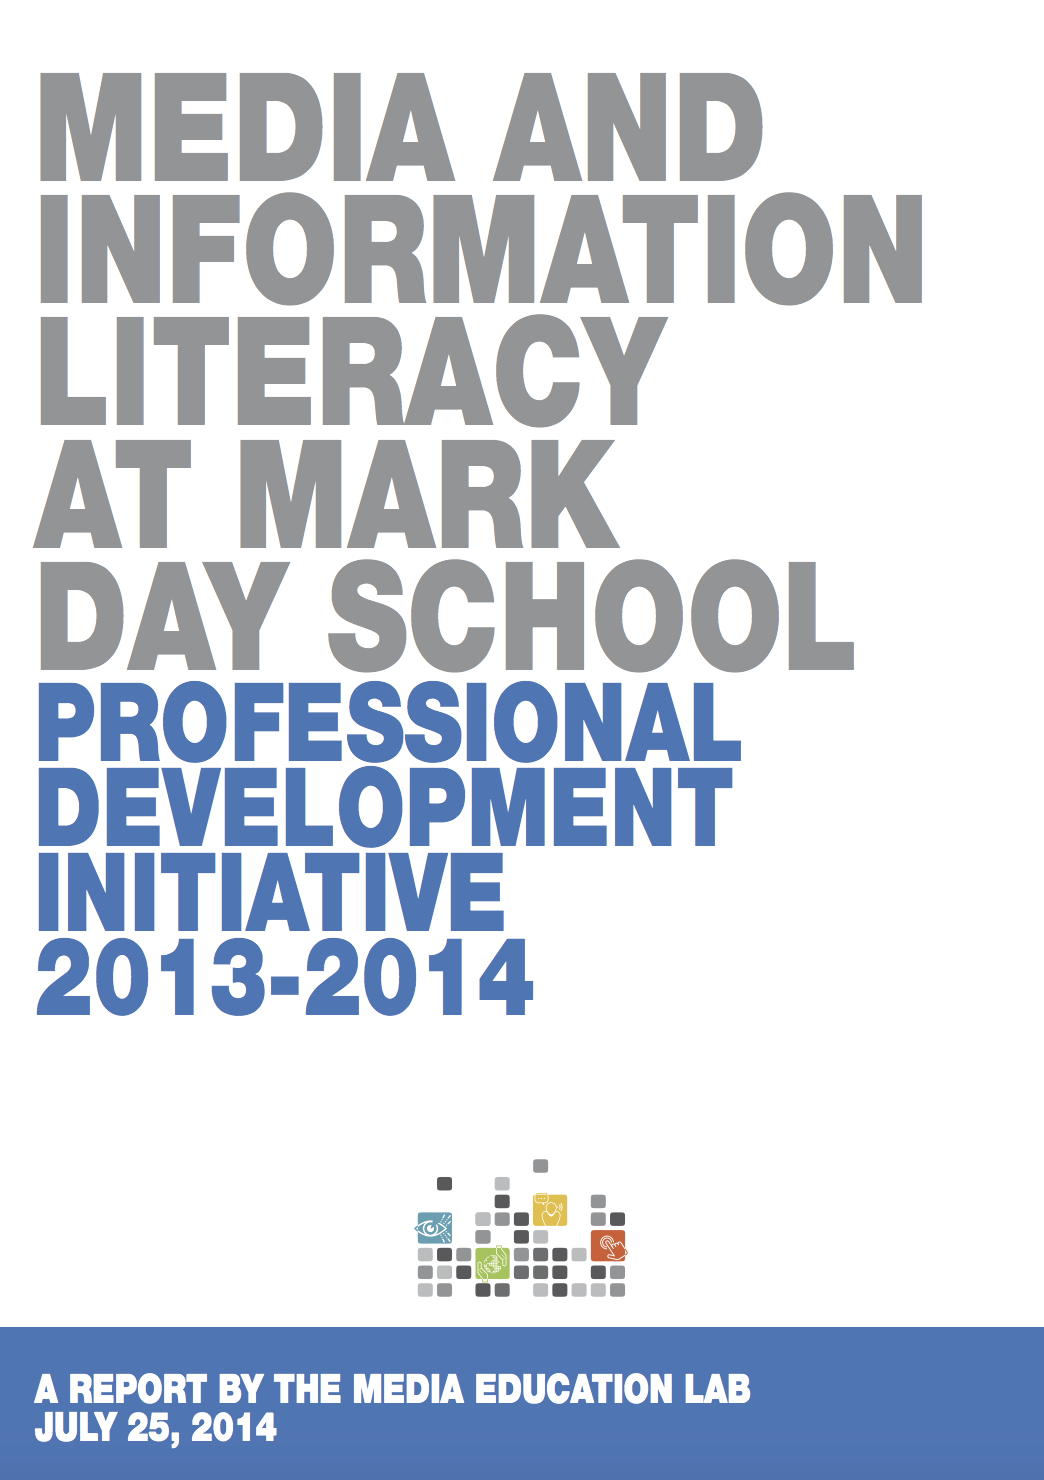 Media and Information Literacy Integration at Mark Day School